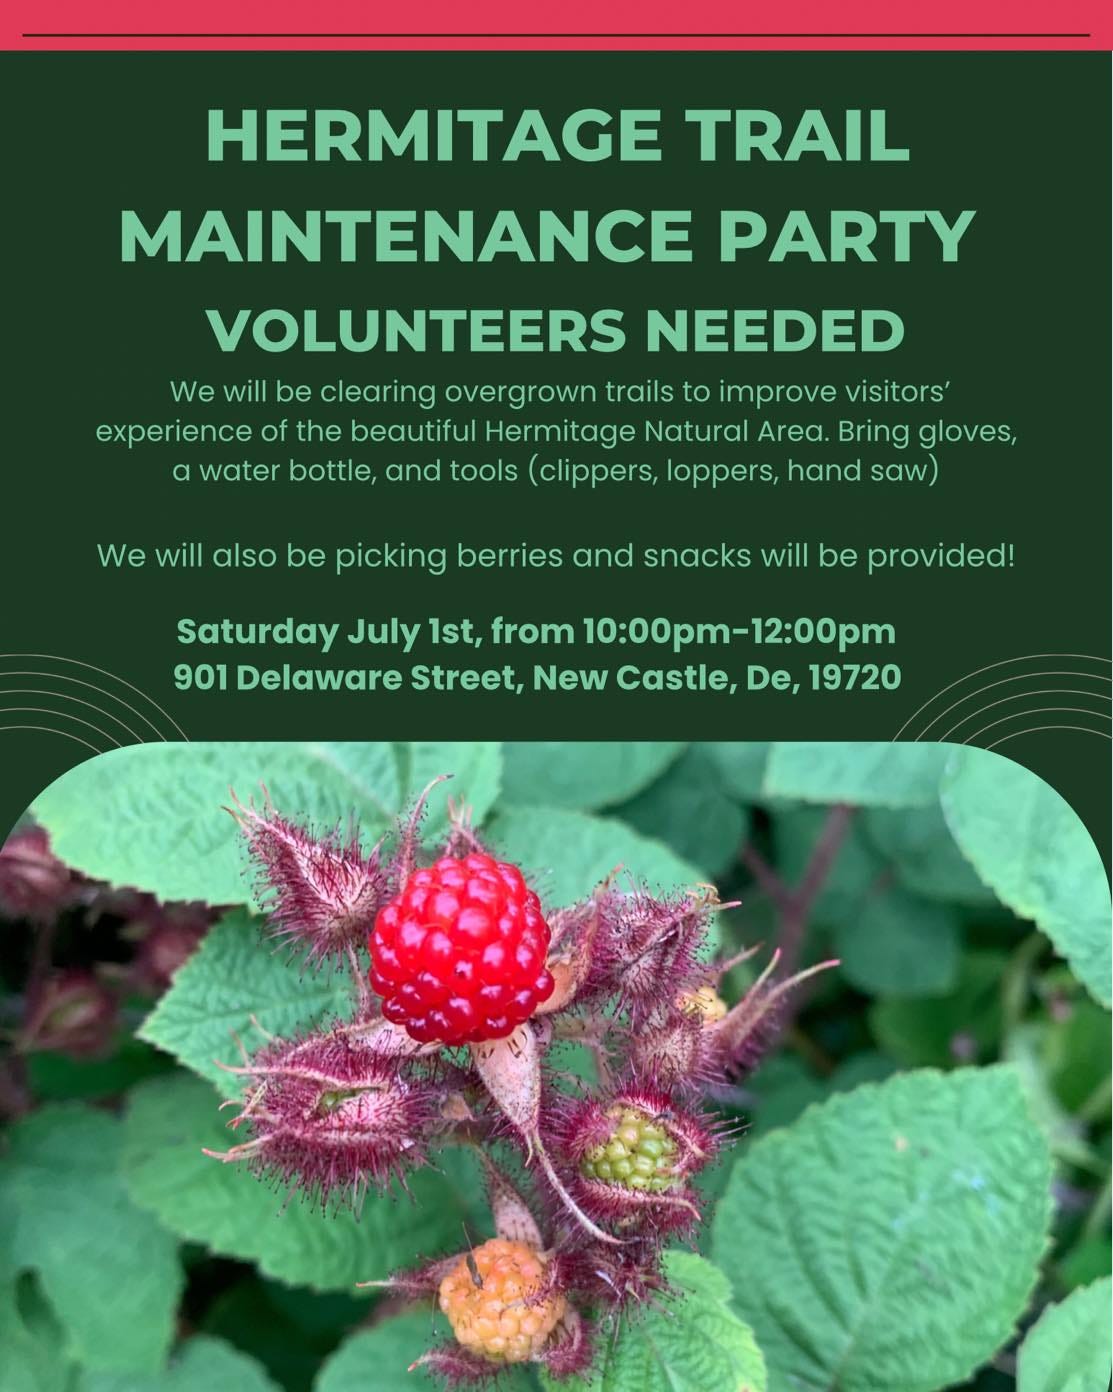 May be an image of text that says 'HERMITAGE TRAIL MAINTENANCE PARTY VOLUNTEERS NEEDED We will be clearing overgrown trails to improve visitors' experience of the beautiful Hermitage Natural Area. Bring gloves, a water bottle, and tools (clippers, loppers, hand saw) We will also be picking berries and snacks will be provided! Saturday July 1st, from 10:00pm-12:00pm 901 Delaware Street, New Castle, 901Delawarestre,NewCastle.De,19720 De, 19720'